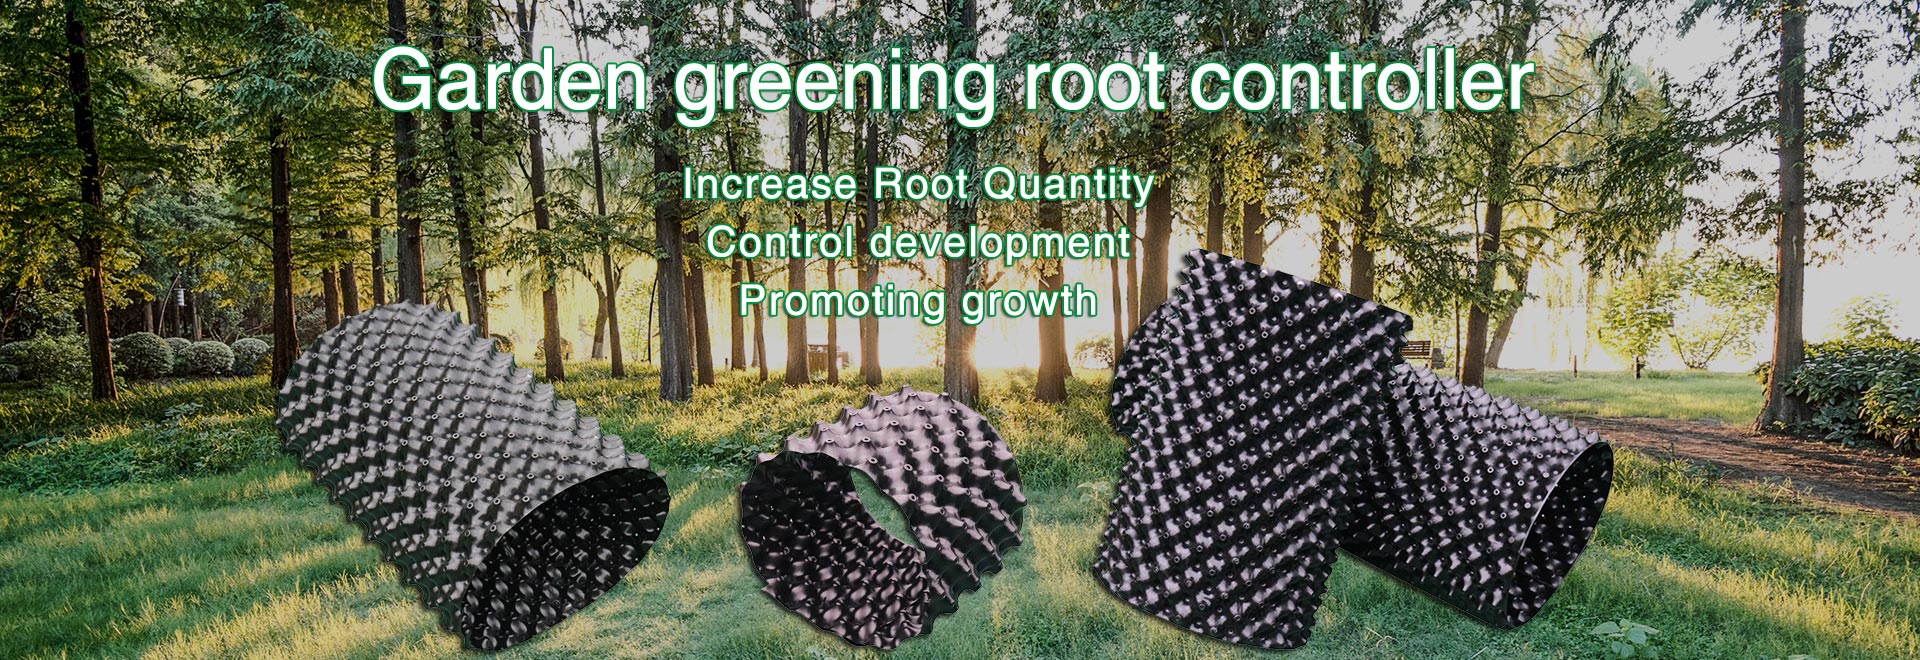 root control, root control equipment，root control container